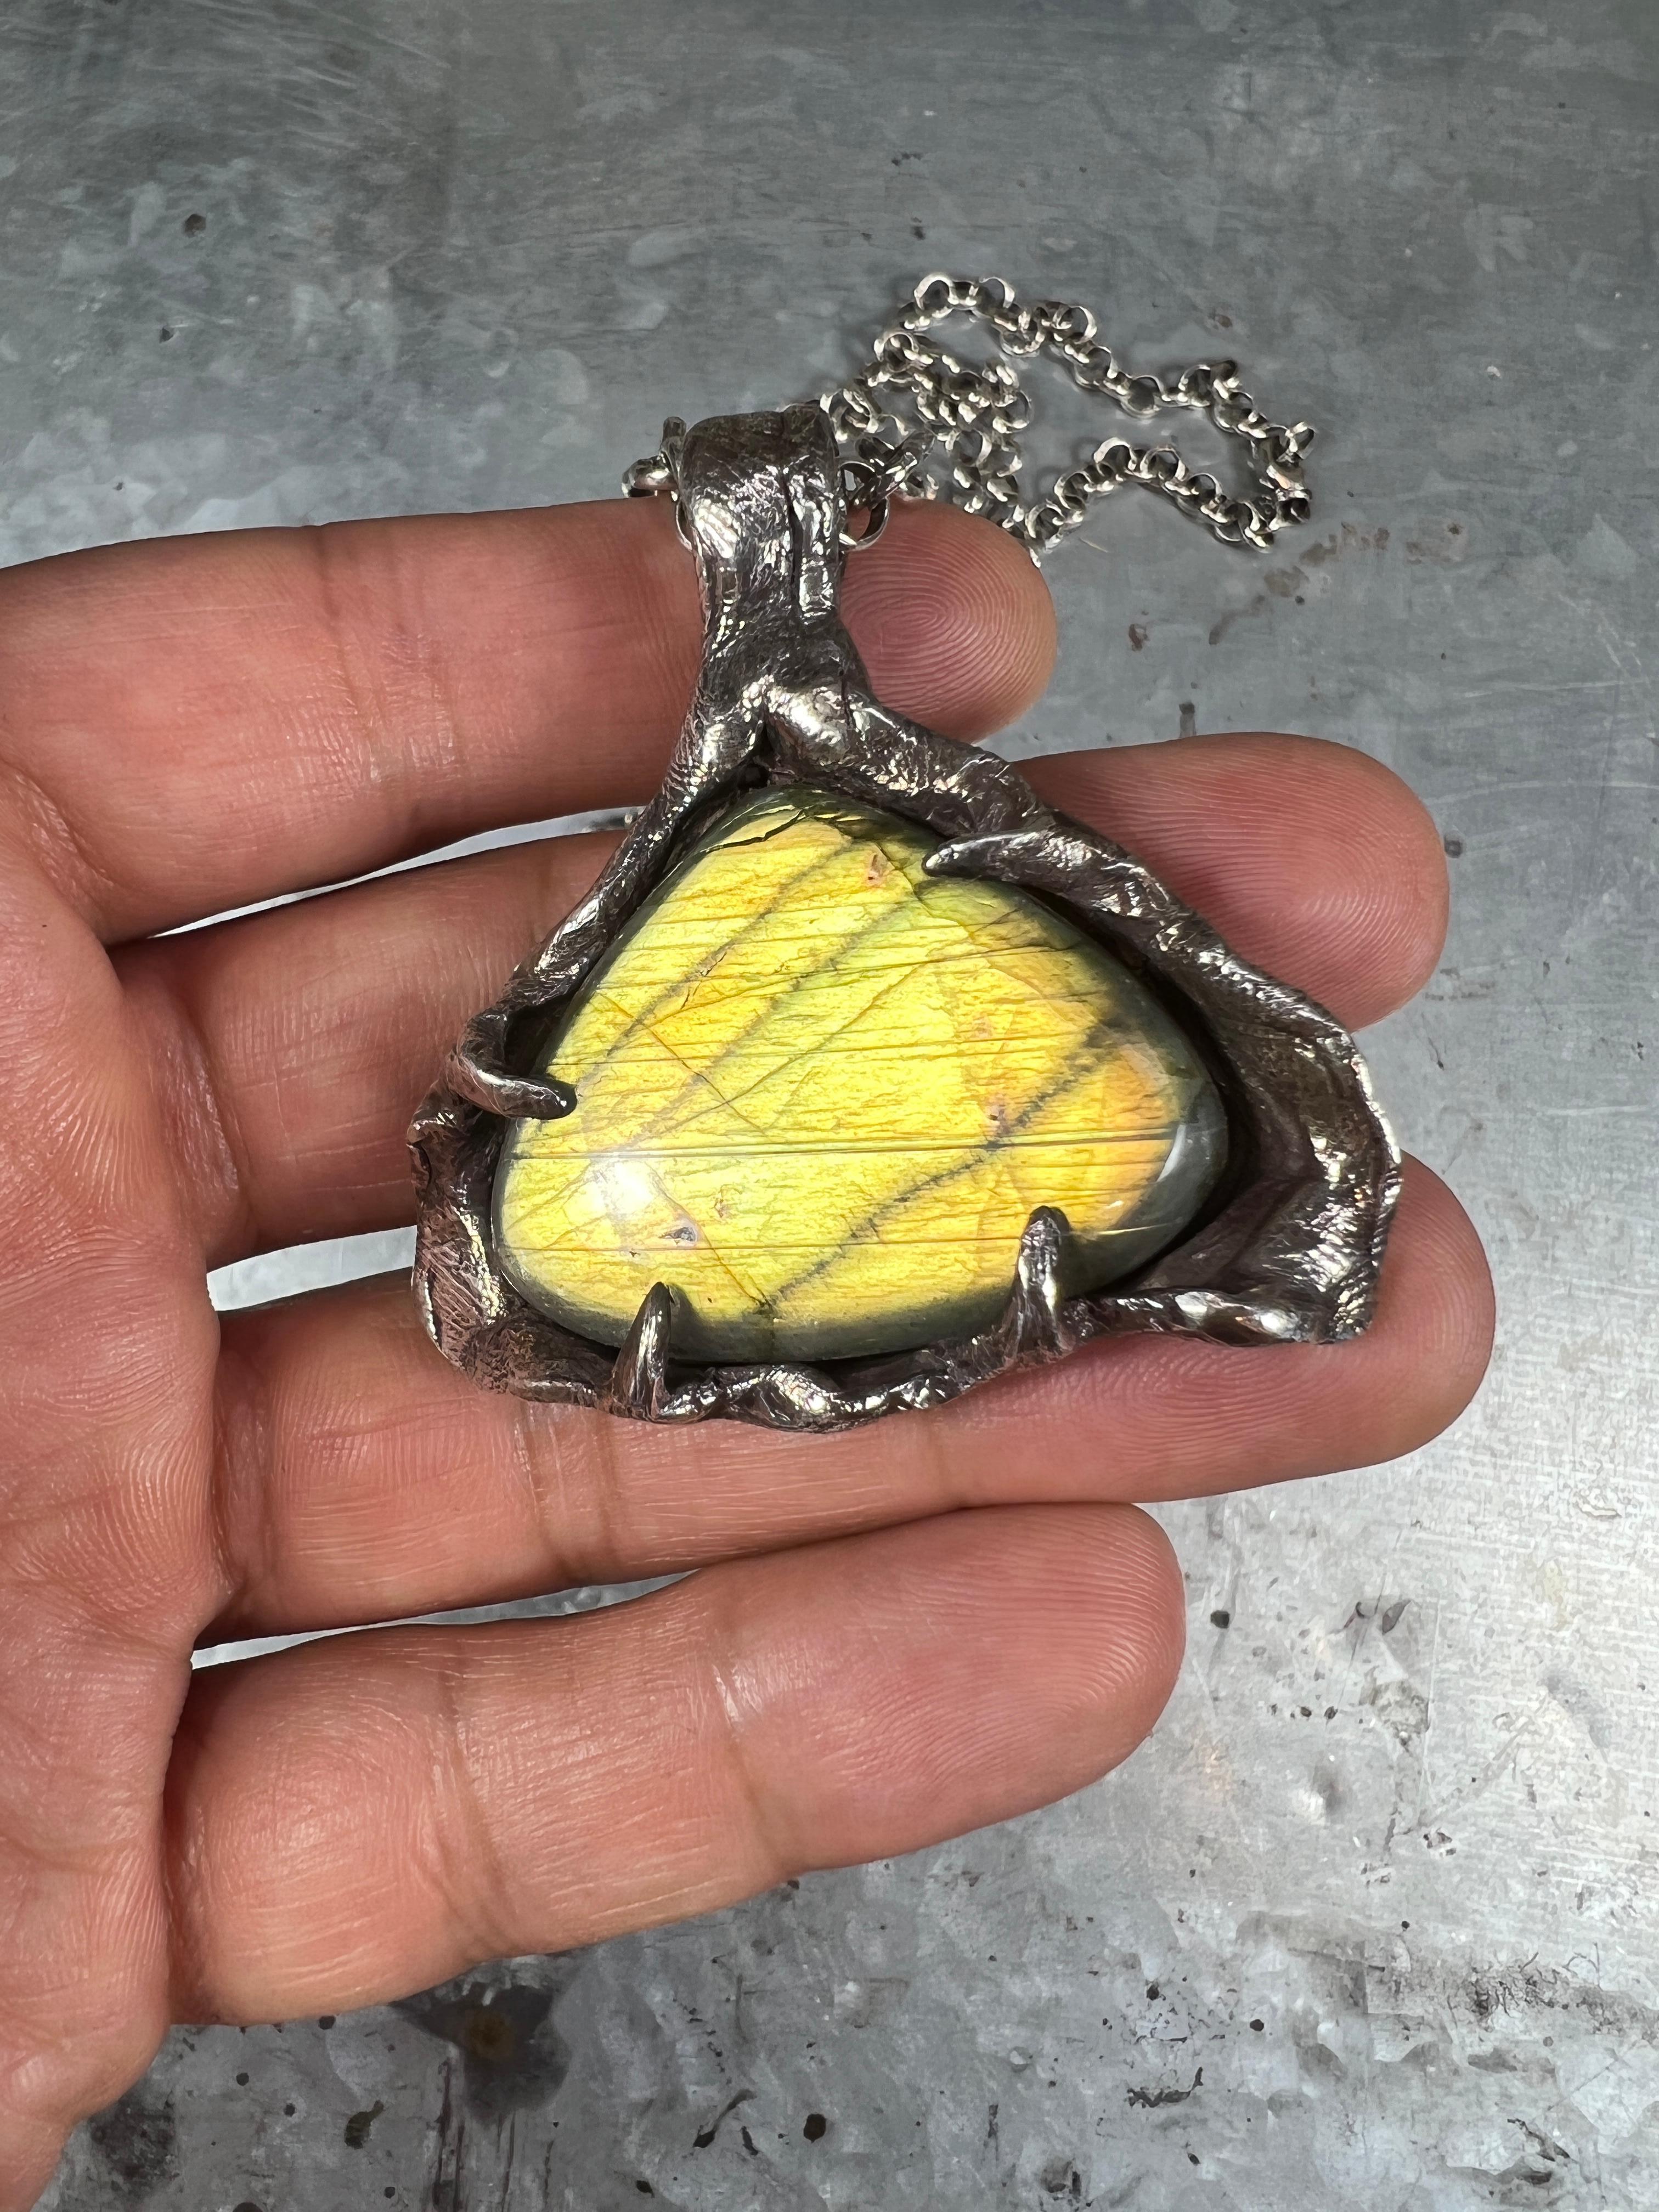 Ancient Light is a pendant created by Ken Fury featuring a rare and unique labradorite stone known for its iridescent play of colors. The stone's surface shimmers and changes color as the pendant is moved at different angles, reminiscent of a